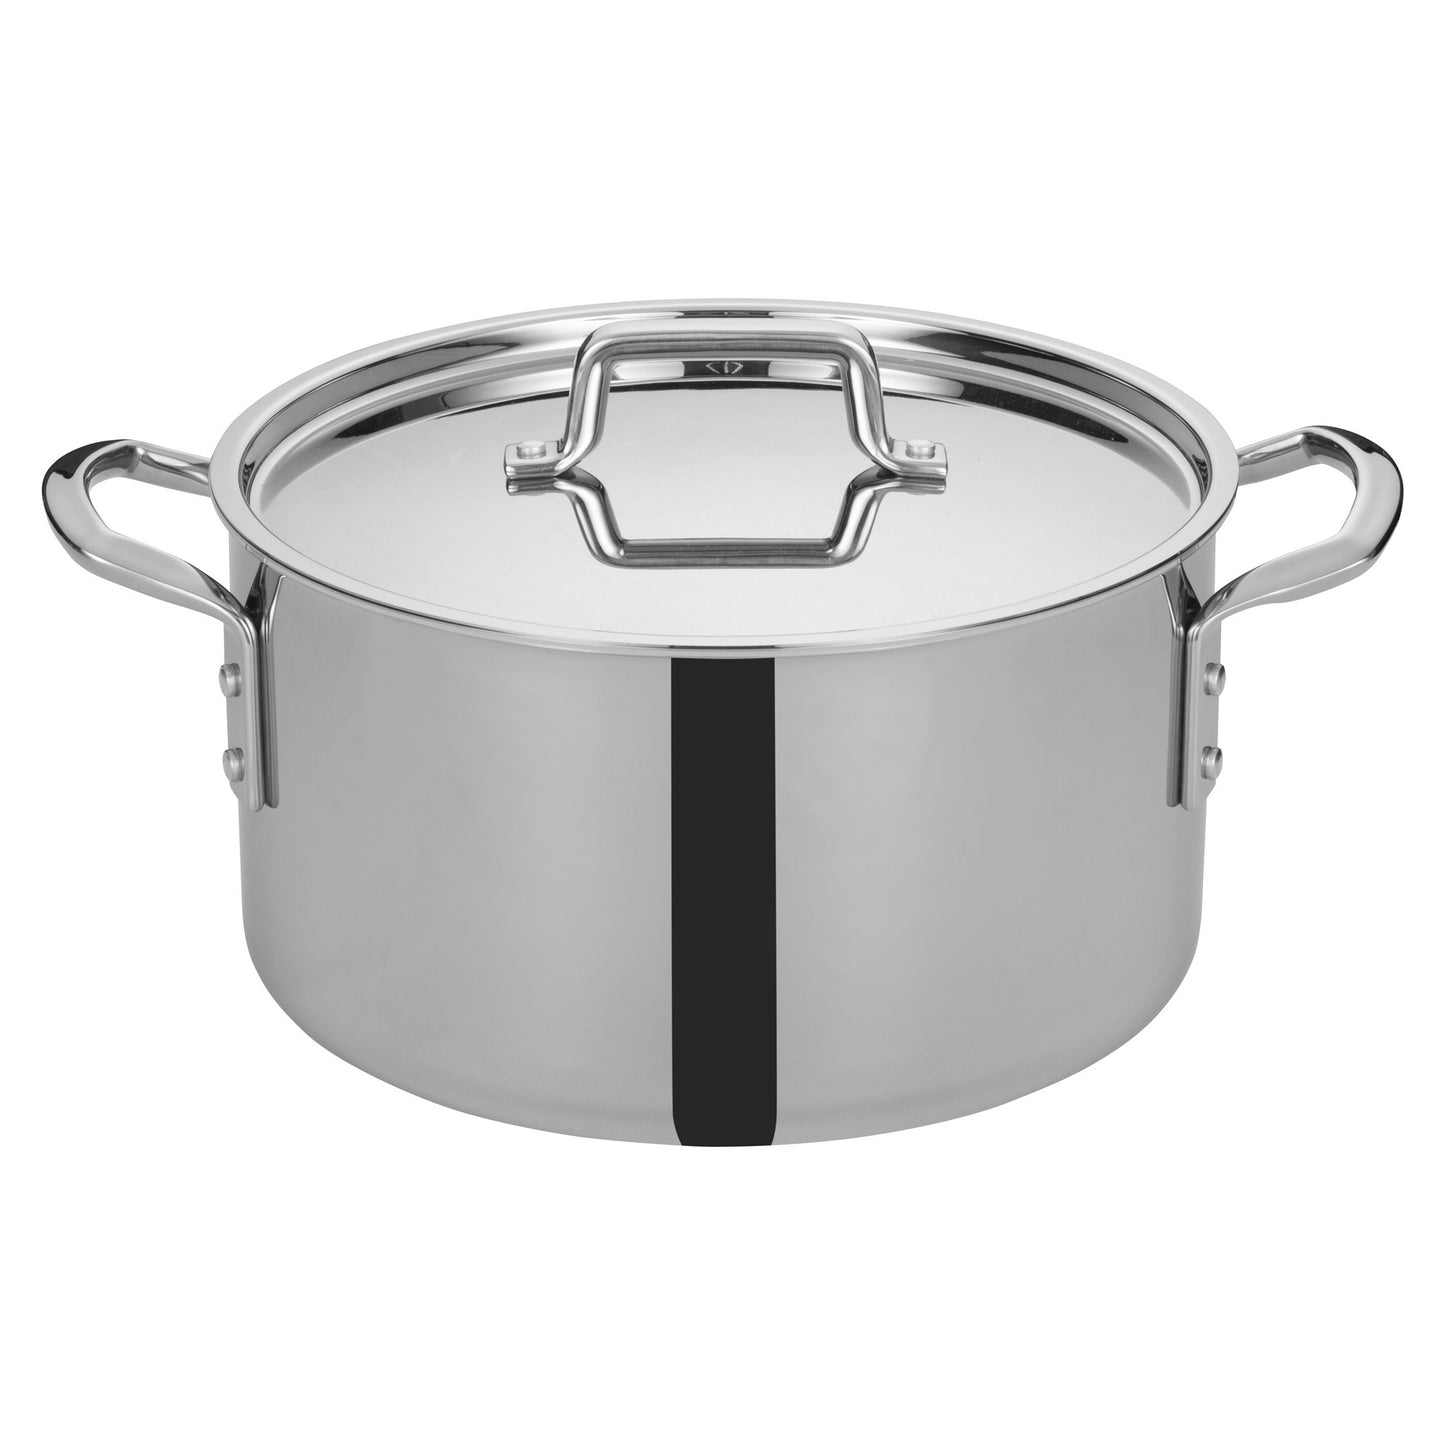 Tri-Gen Tri-Ply Stainless Steel Stock Pot with Cover - 12 Quart